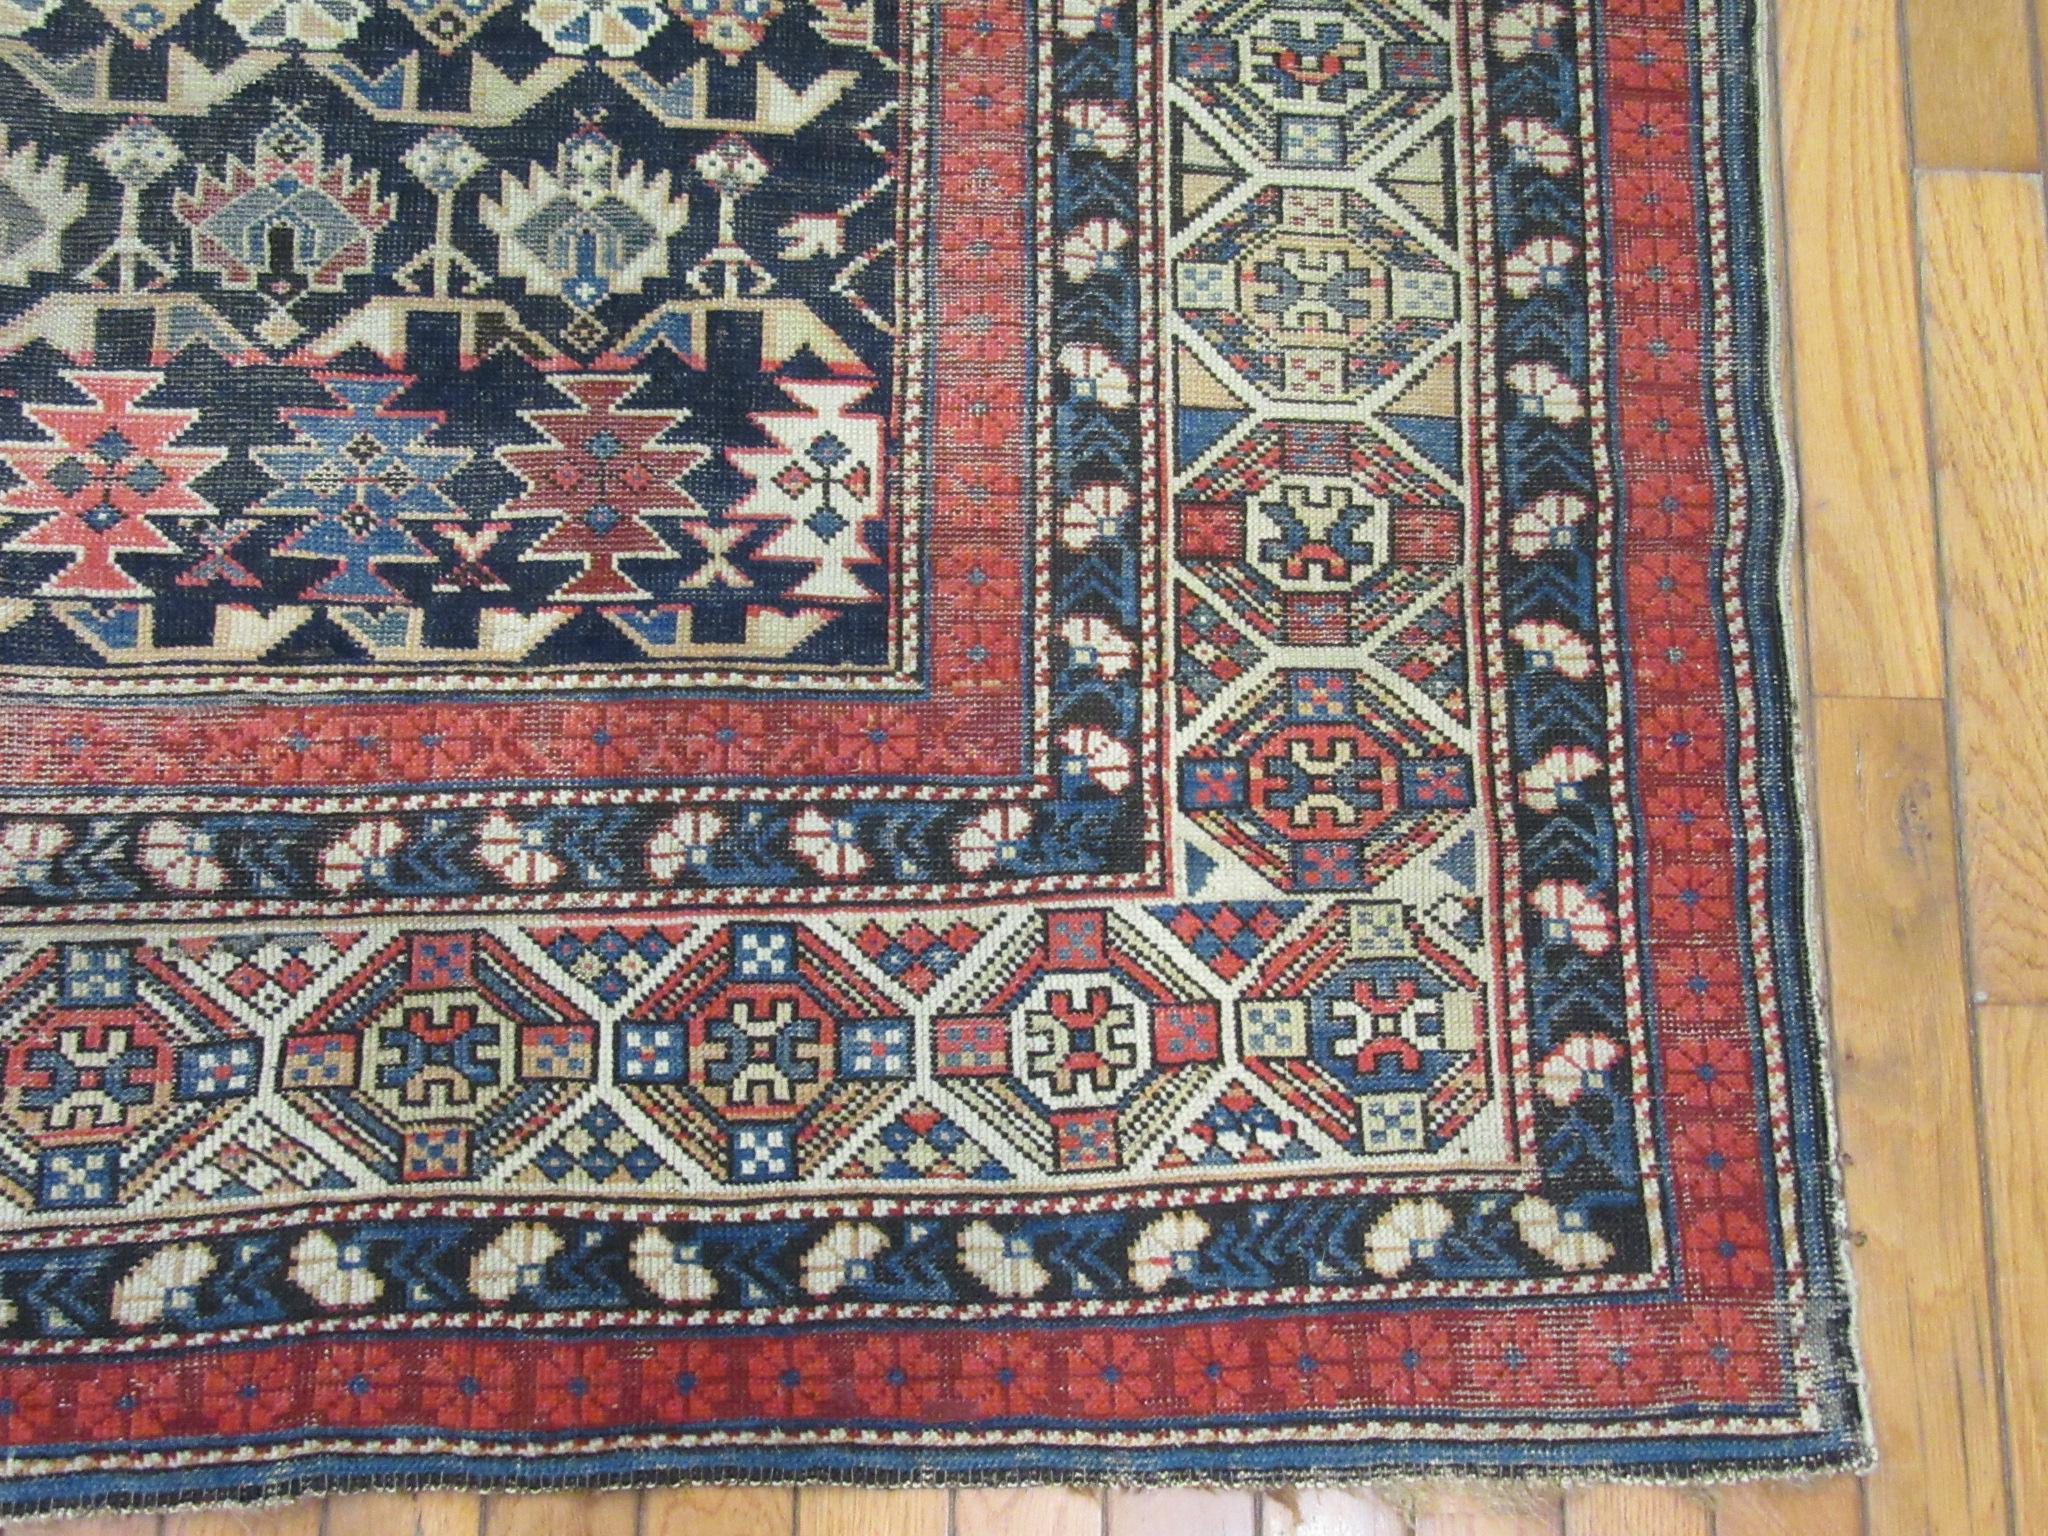 Antique Hand-Knotted Wool Caucasian Shirvan Rug 4